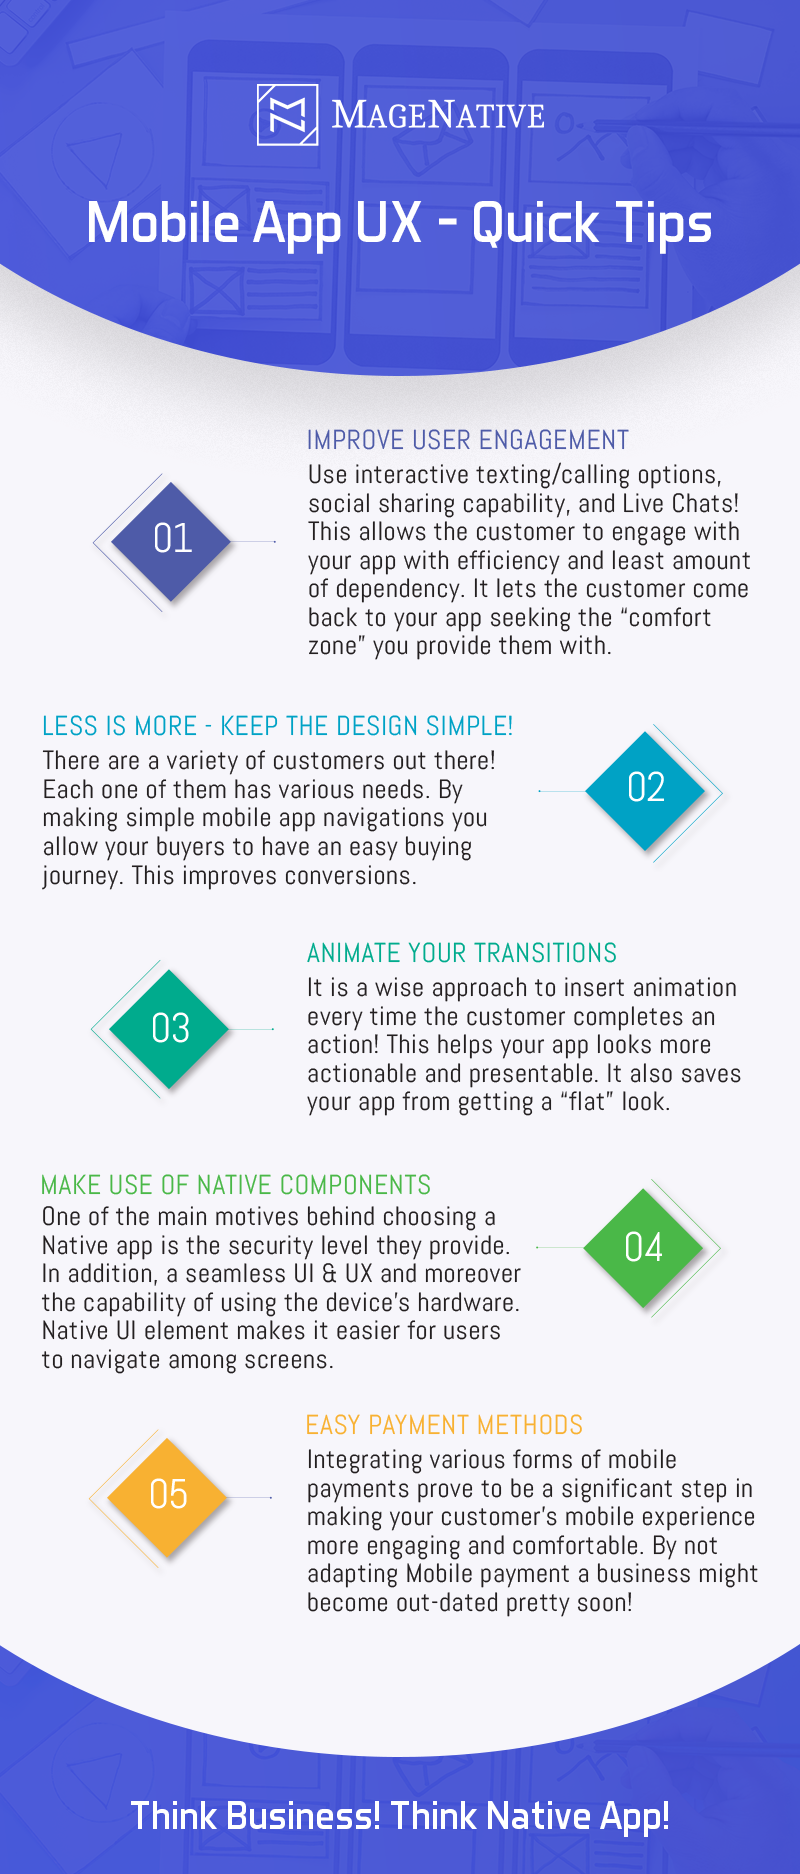 How to master user experience (UX) in mobile apps - Infographic